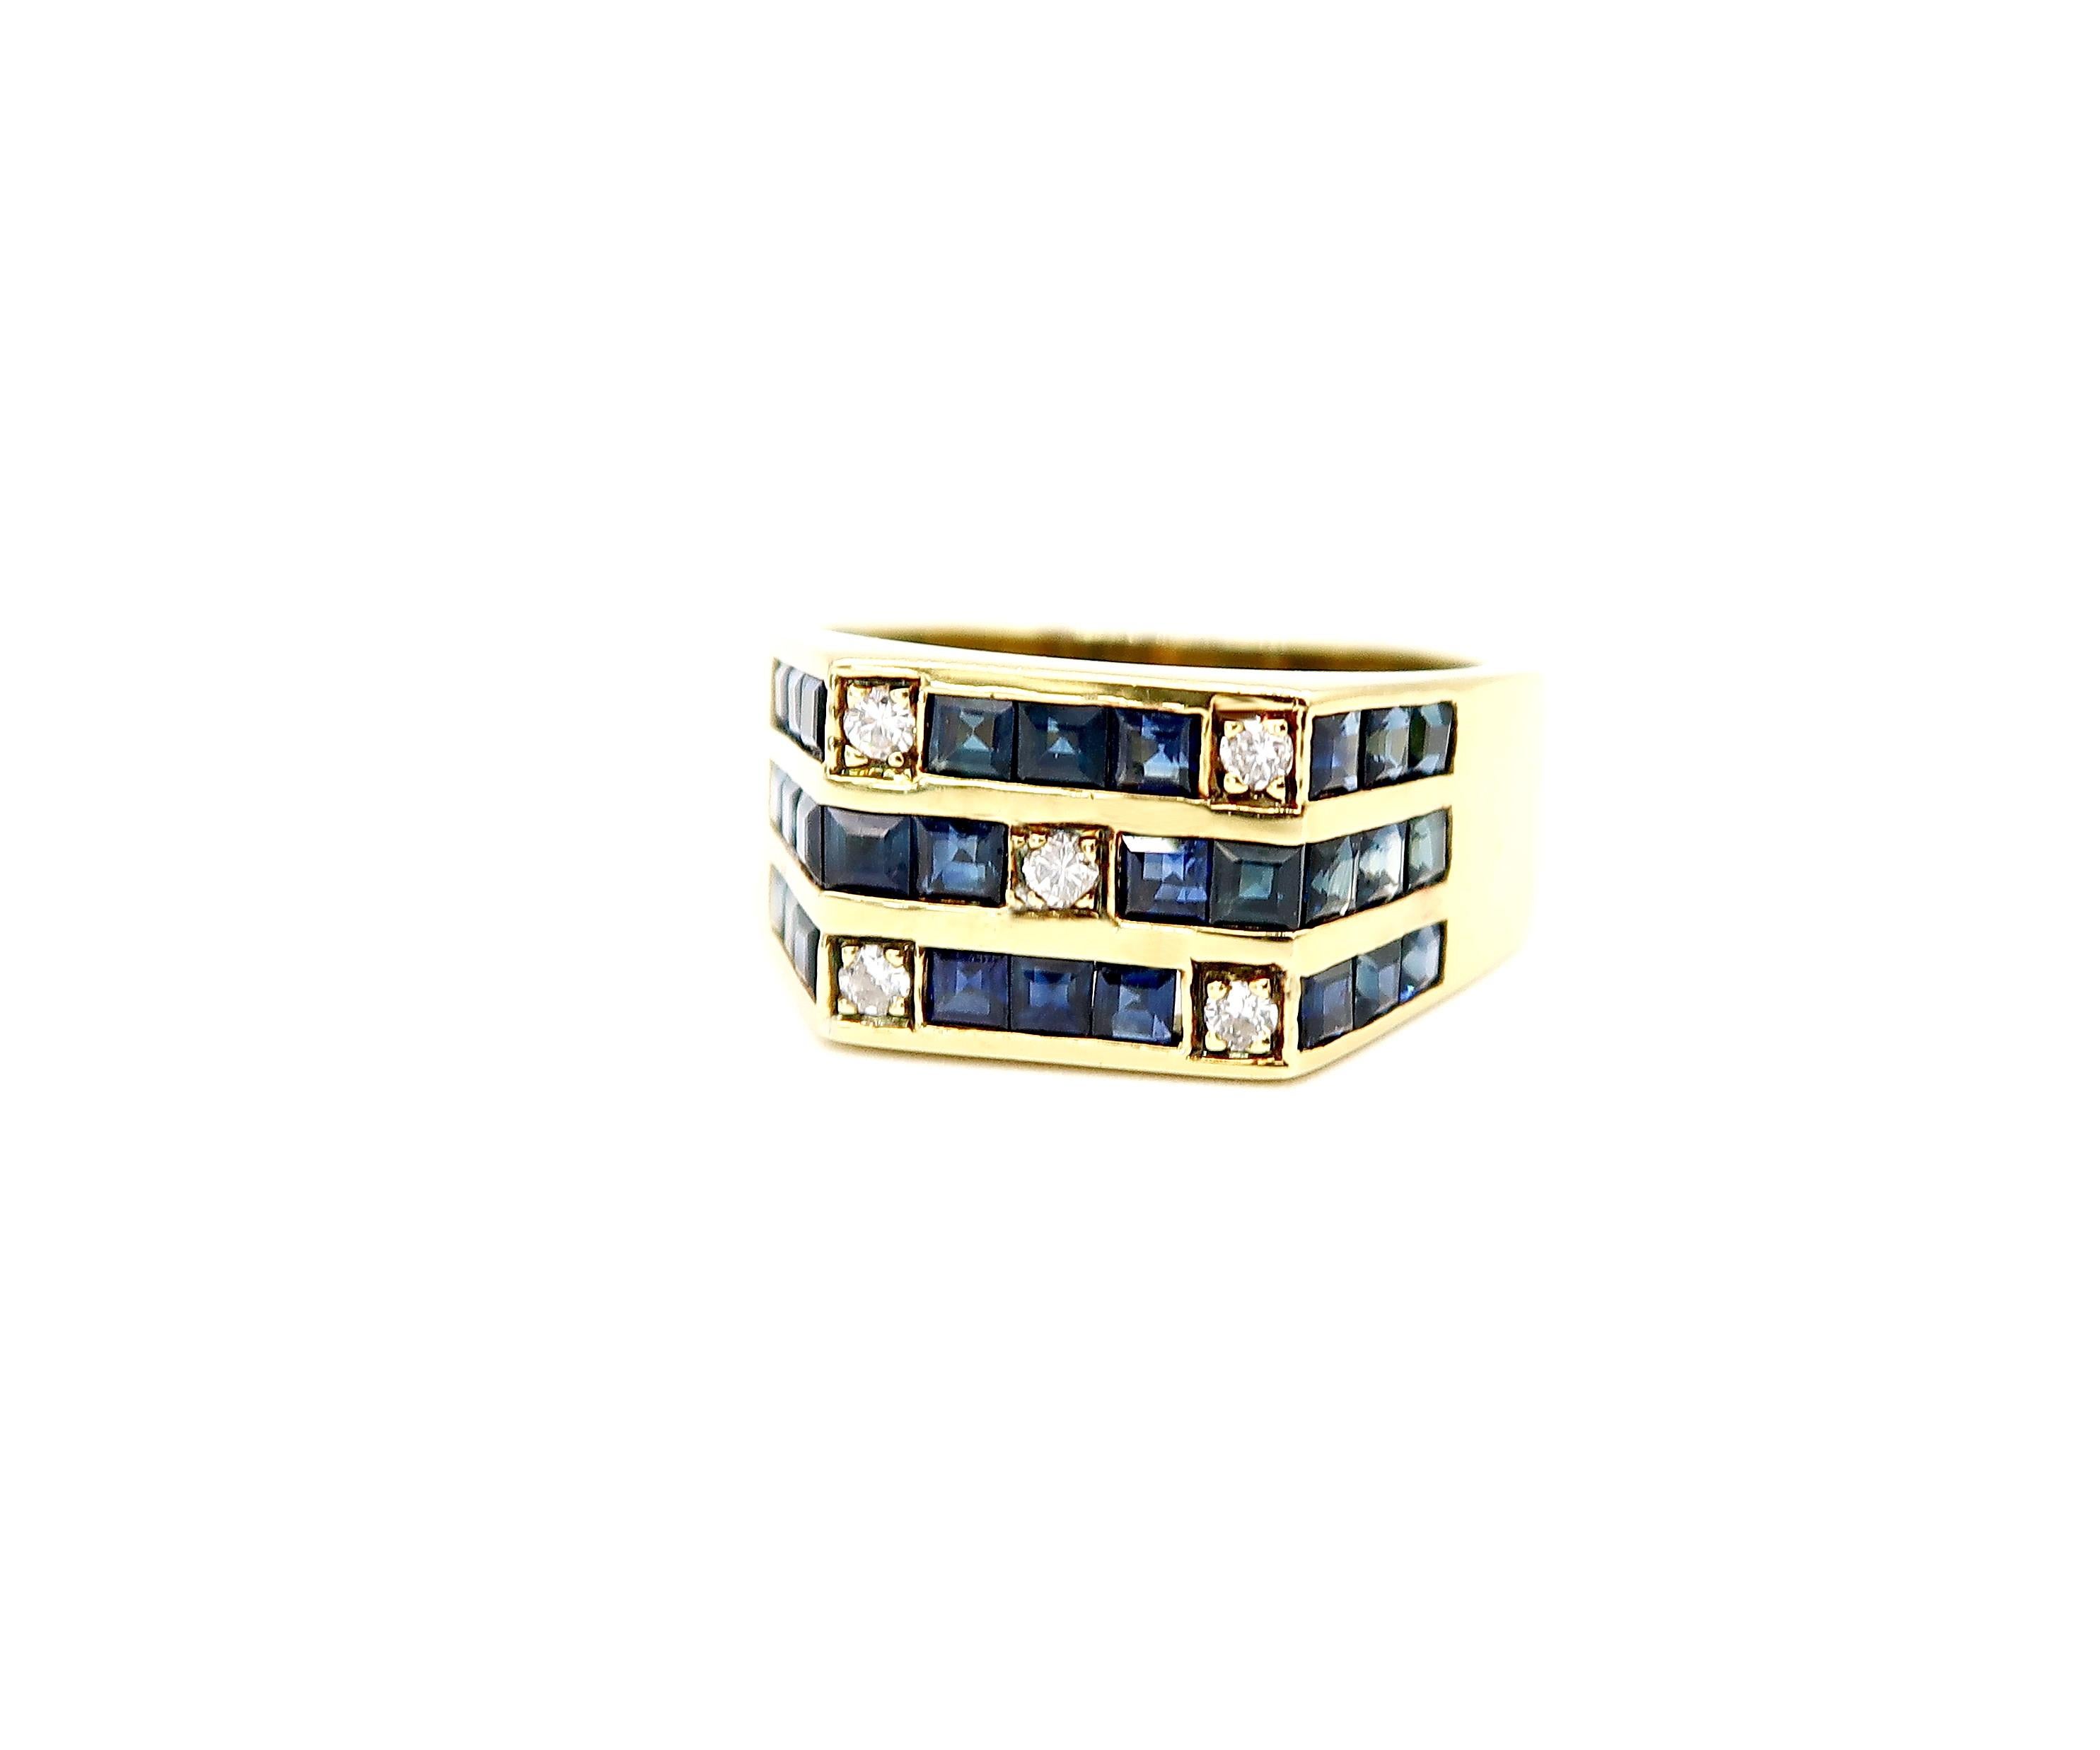 Diamond and Princess Cut Blue Sapphire Grid 18 Karat Gold Hexagon Men's Ring

Please let us know upon checkout should you wish to have the ring resized. 
Ring size: US 7, UK N

Gold: 18K Yellow Gold 7.1g.
Sapphire: 2.39cts.
Diamond: 0.21ct.